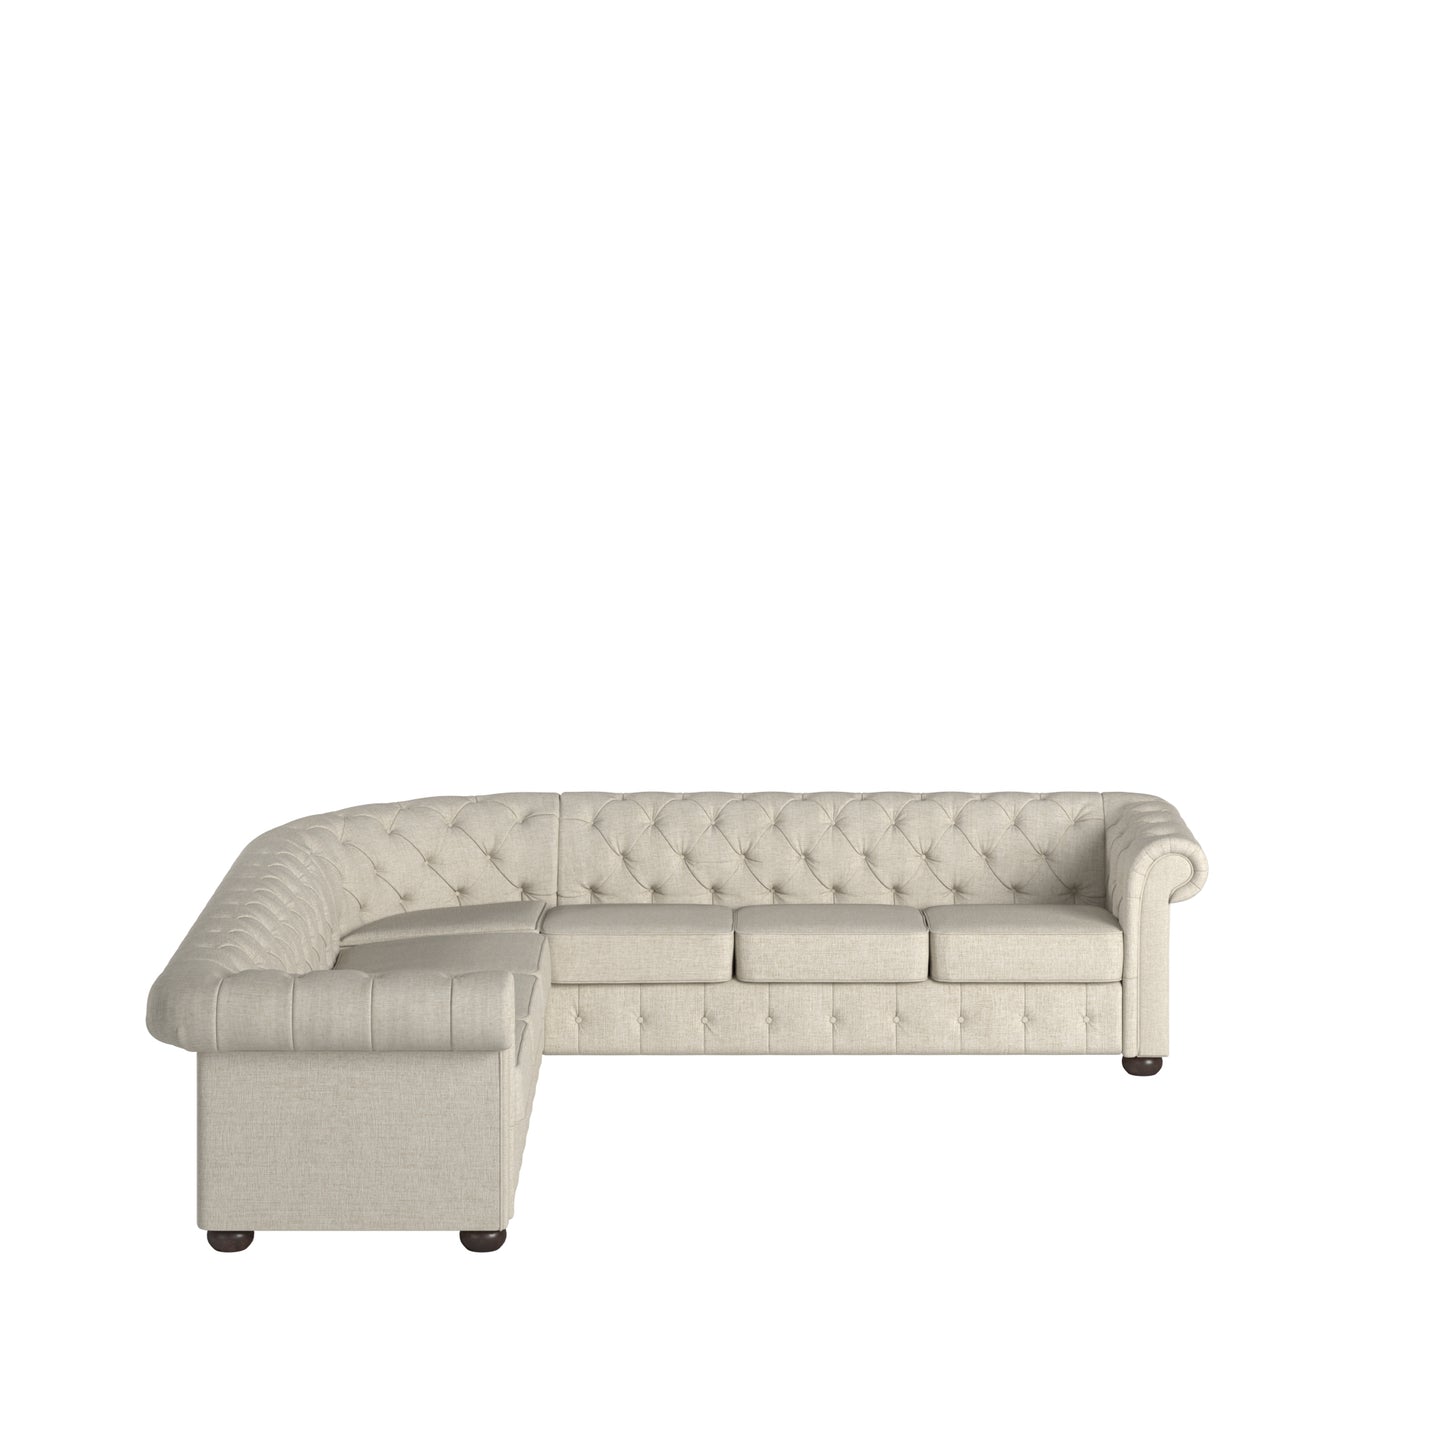 7-Seat L-Shaped Chesterfield Sectional Sofa - Beige Linen